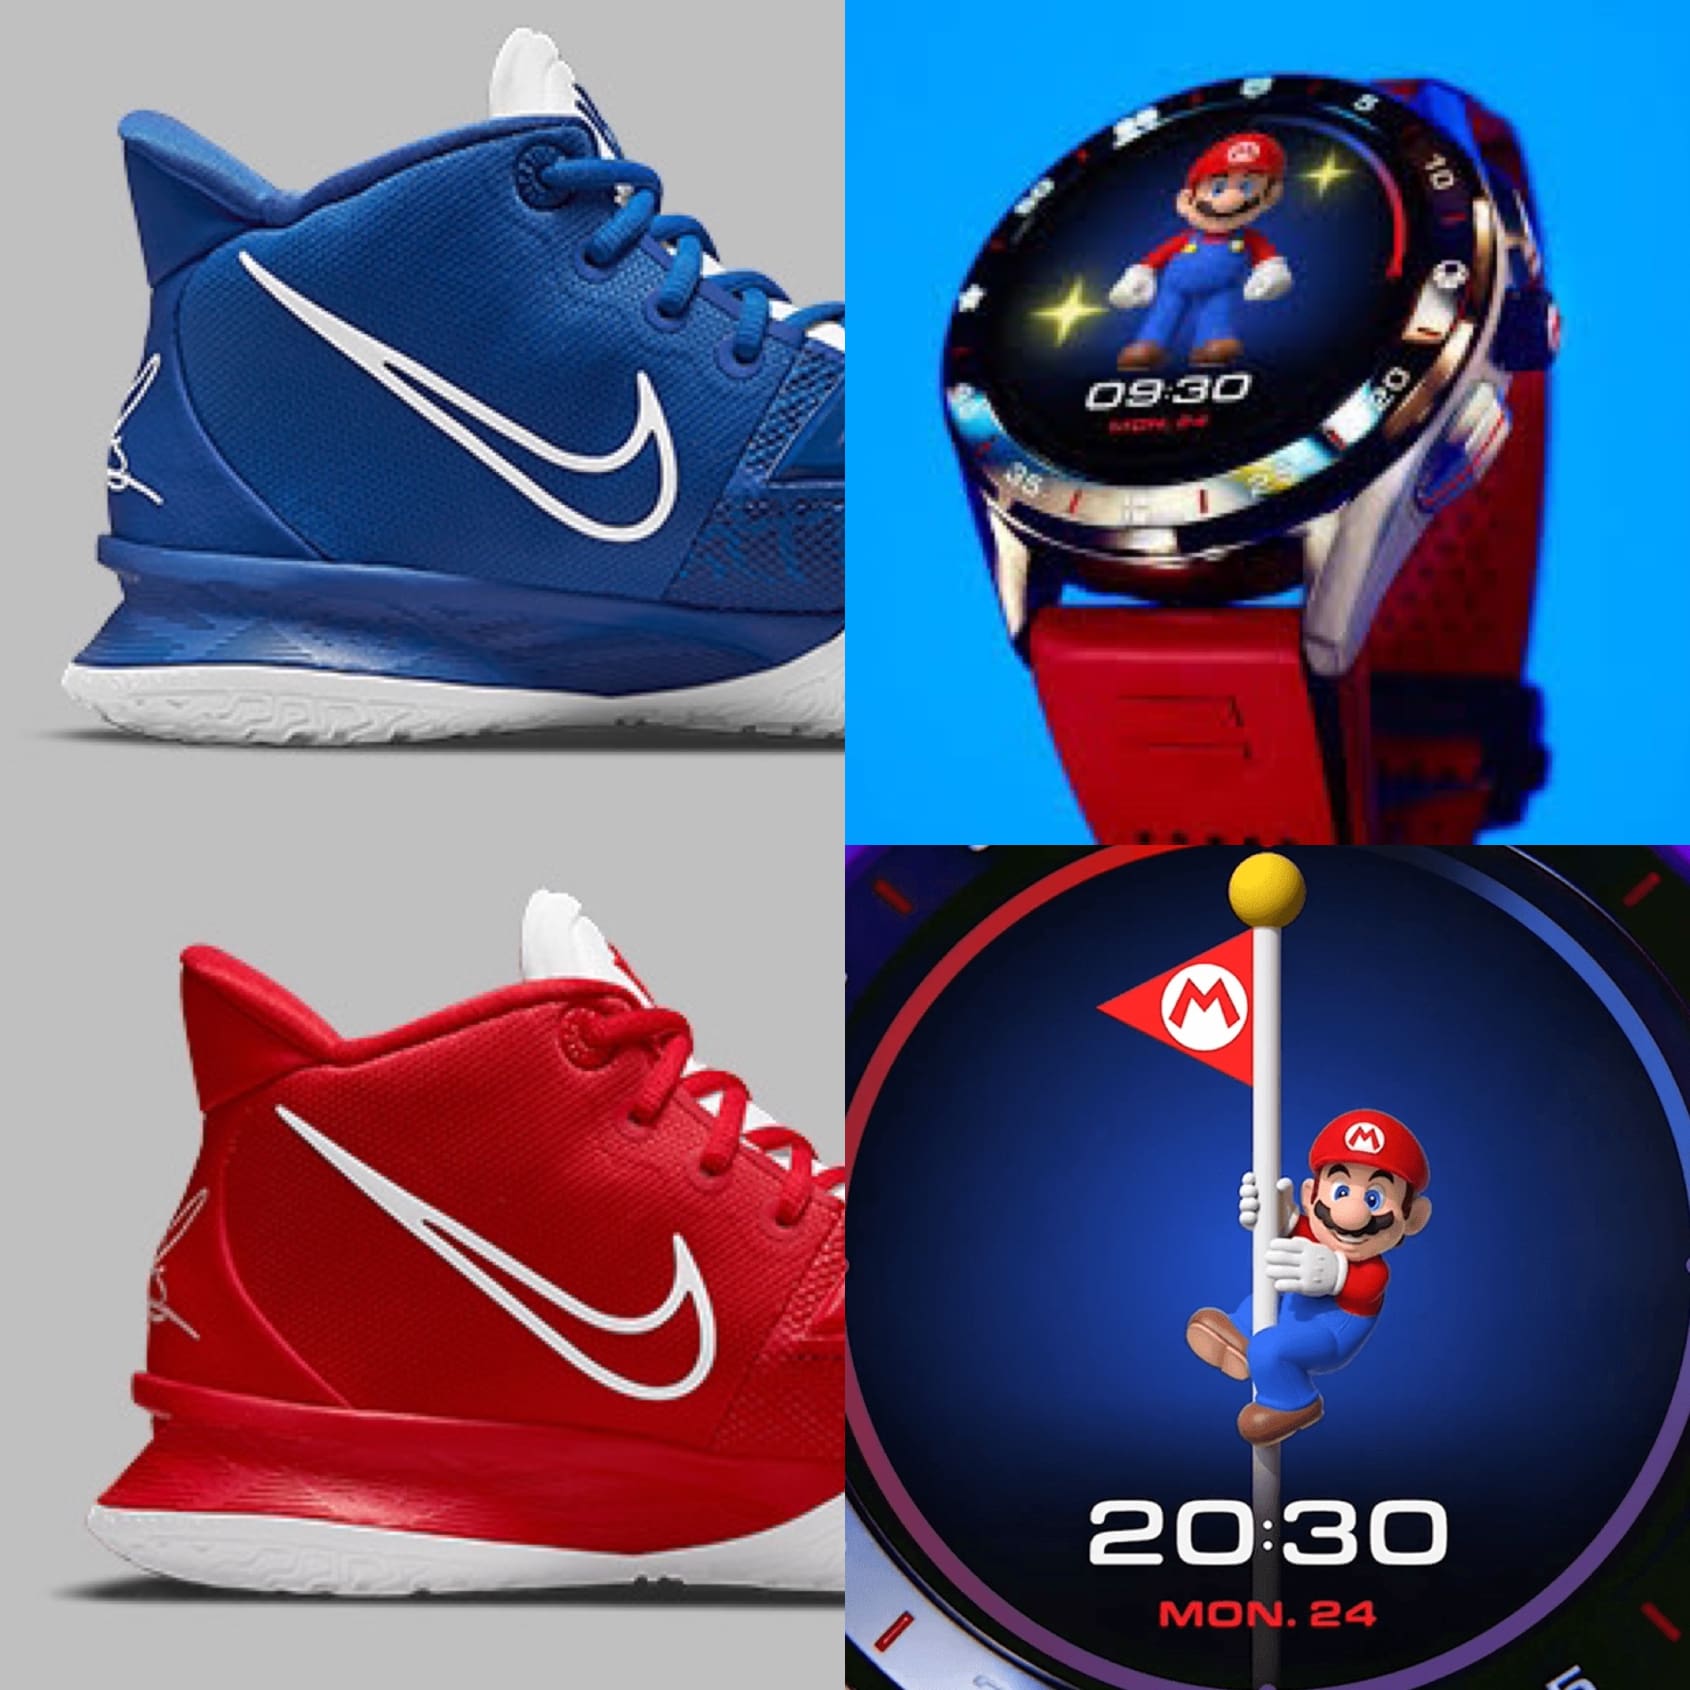 #Kixntix: The TAG Heuer Connected x Super Mario with Nikes to make you jump to the next level